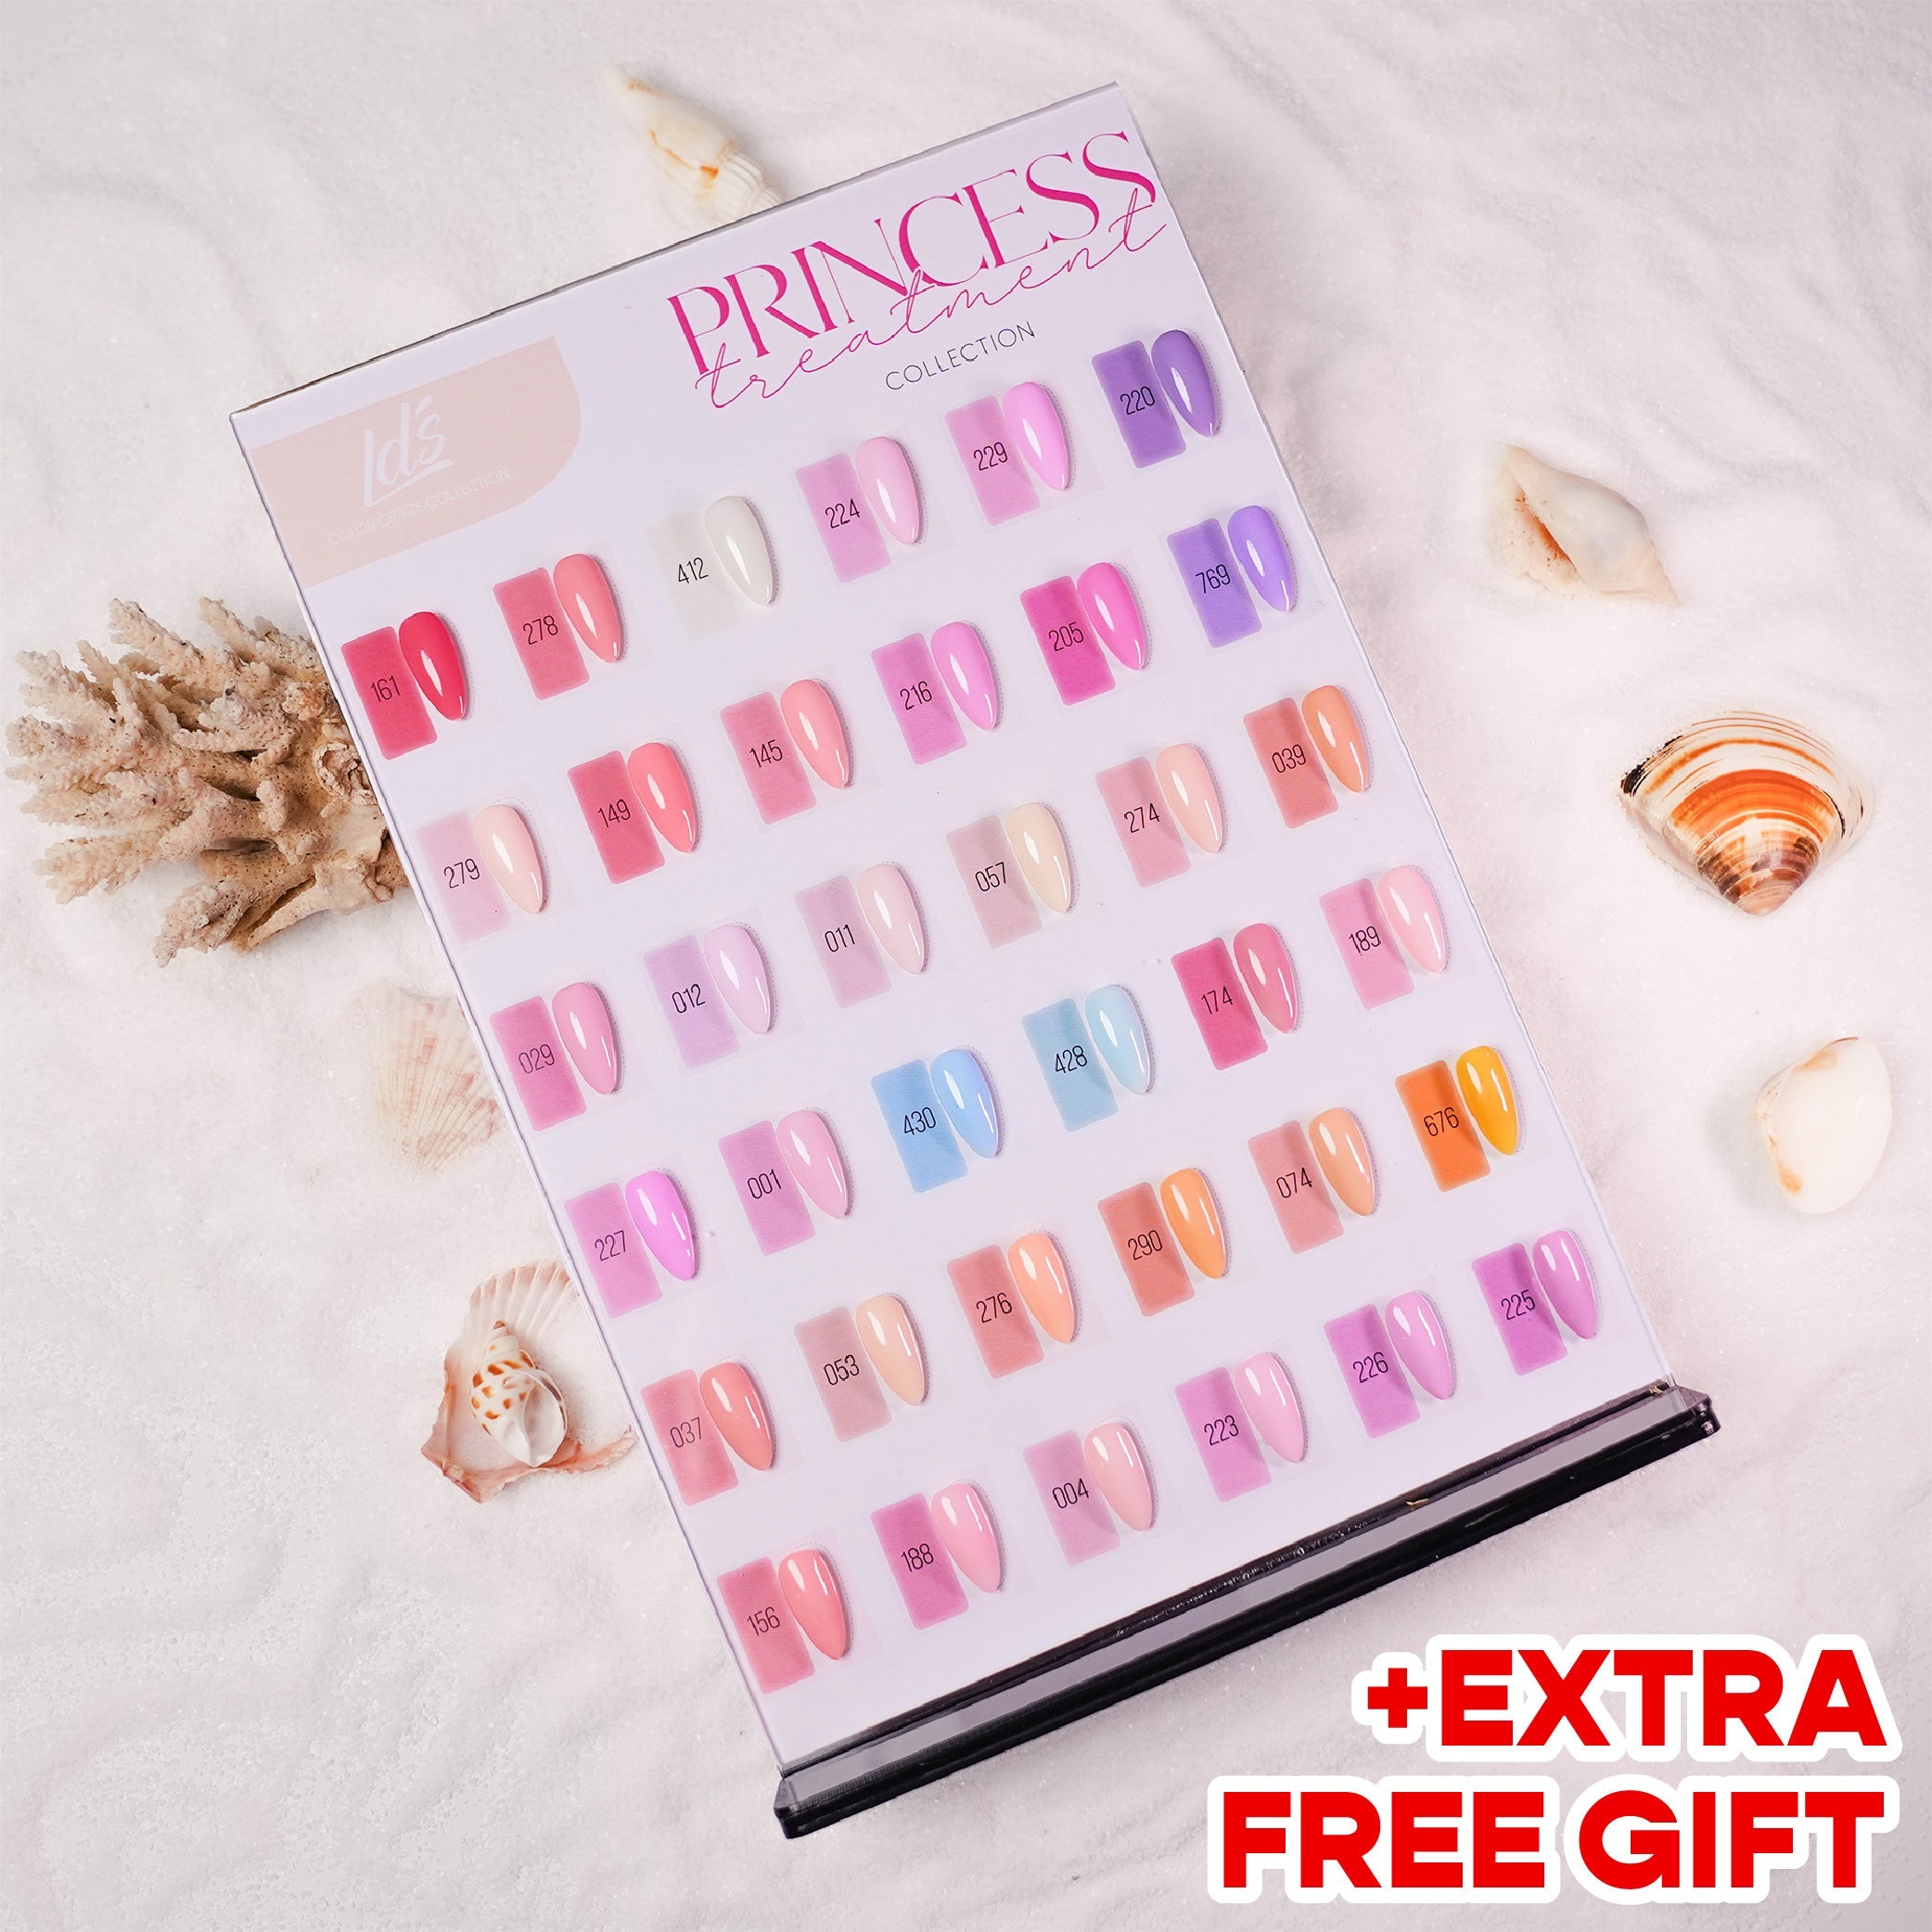 LDS Set 36 Colors - Gel Polish 0.5oz - Princess Treatment Collection (+3 Free Gels + 1 Exclusive Sticker + Free Gift by dollars amount)